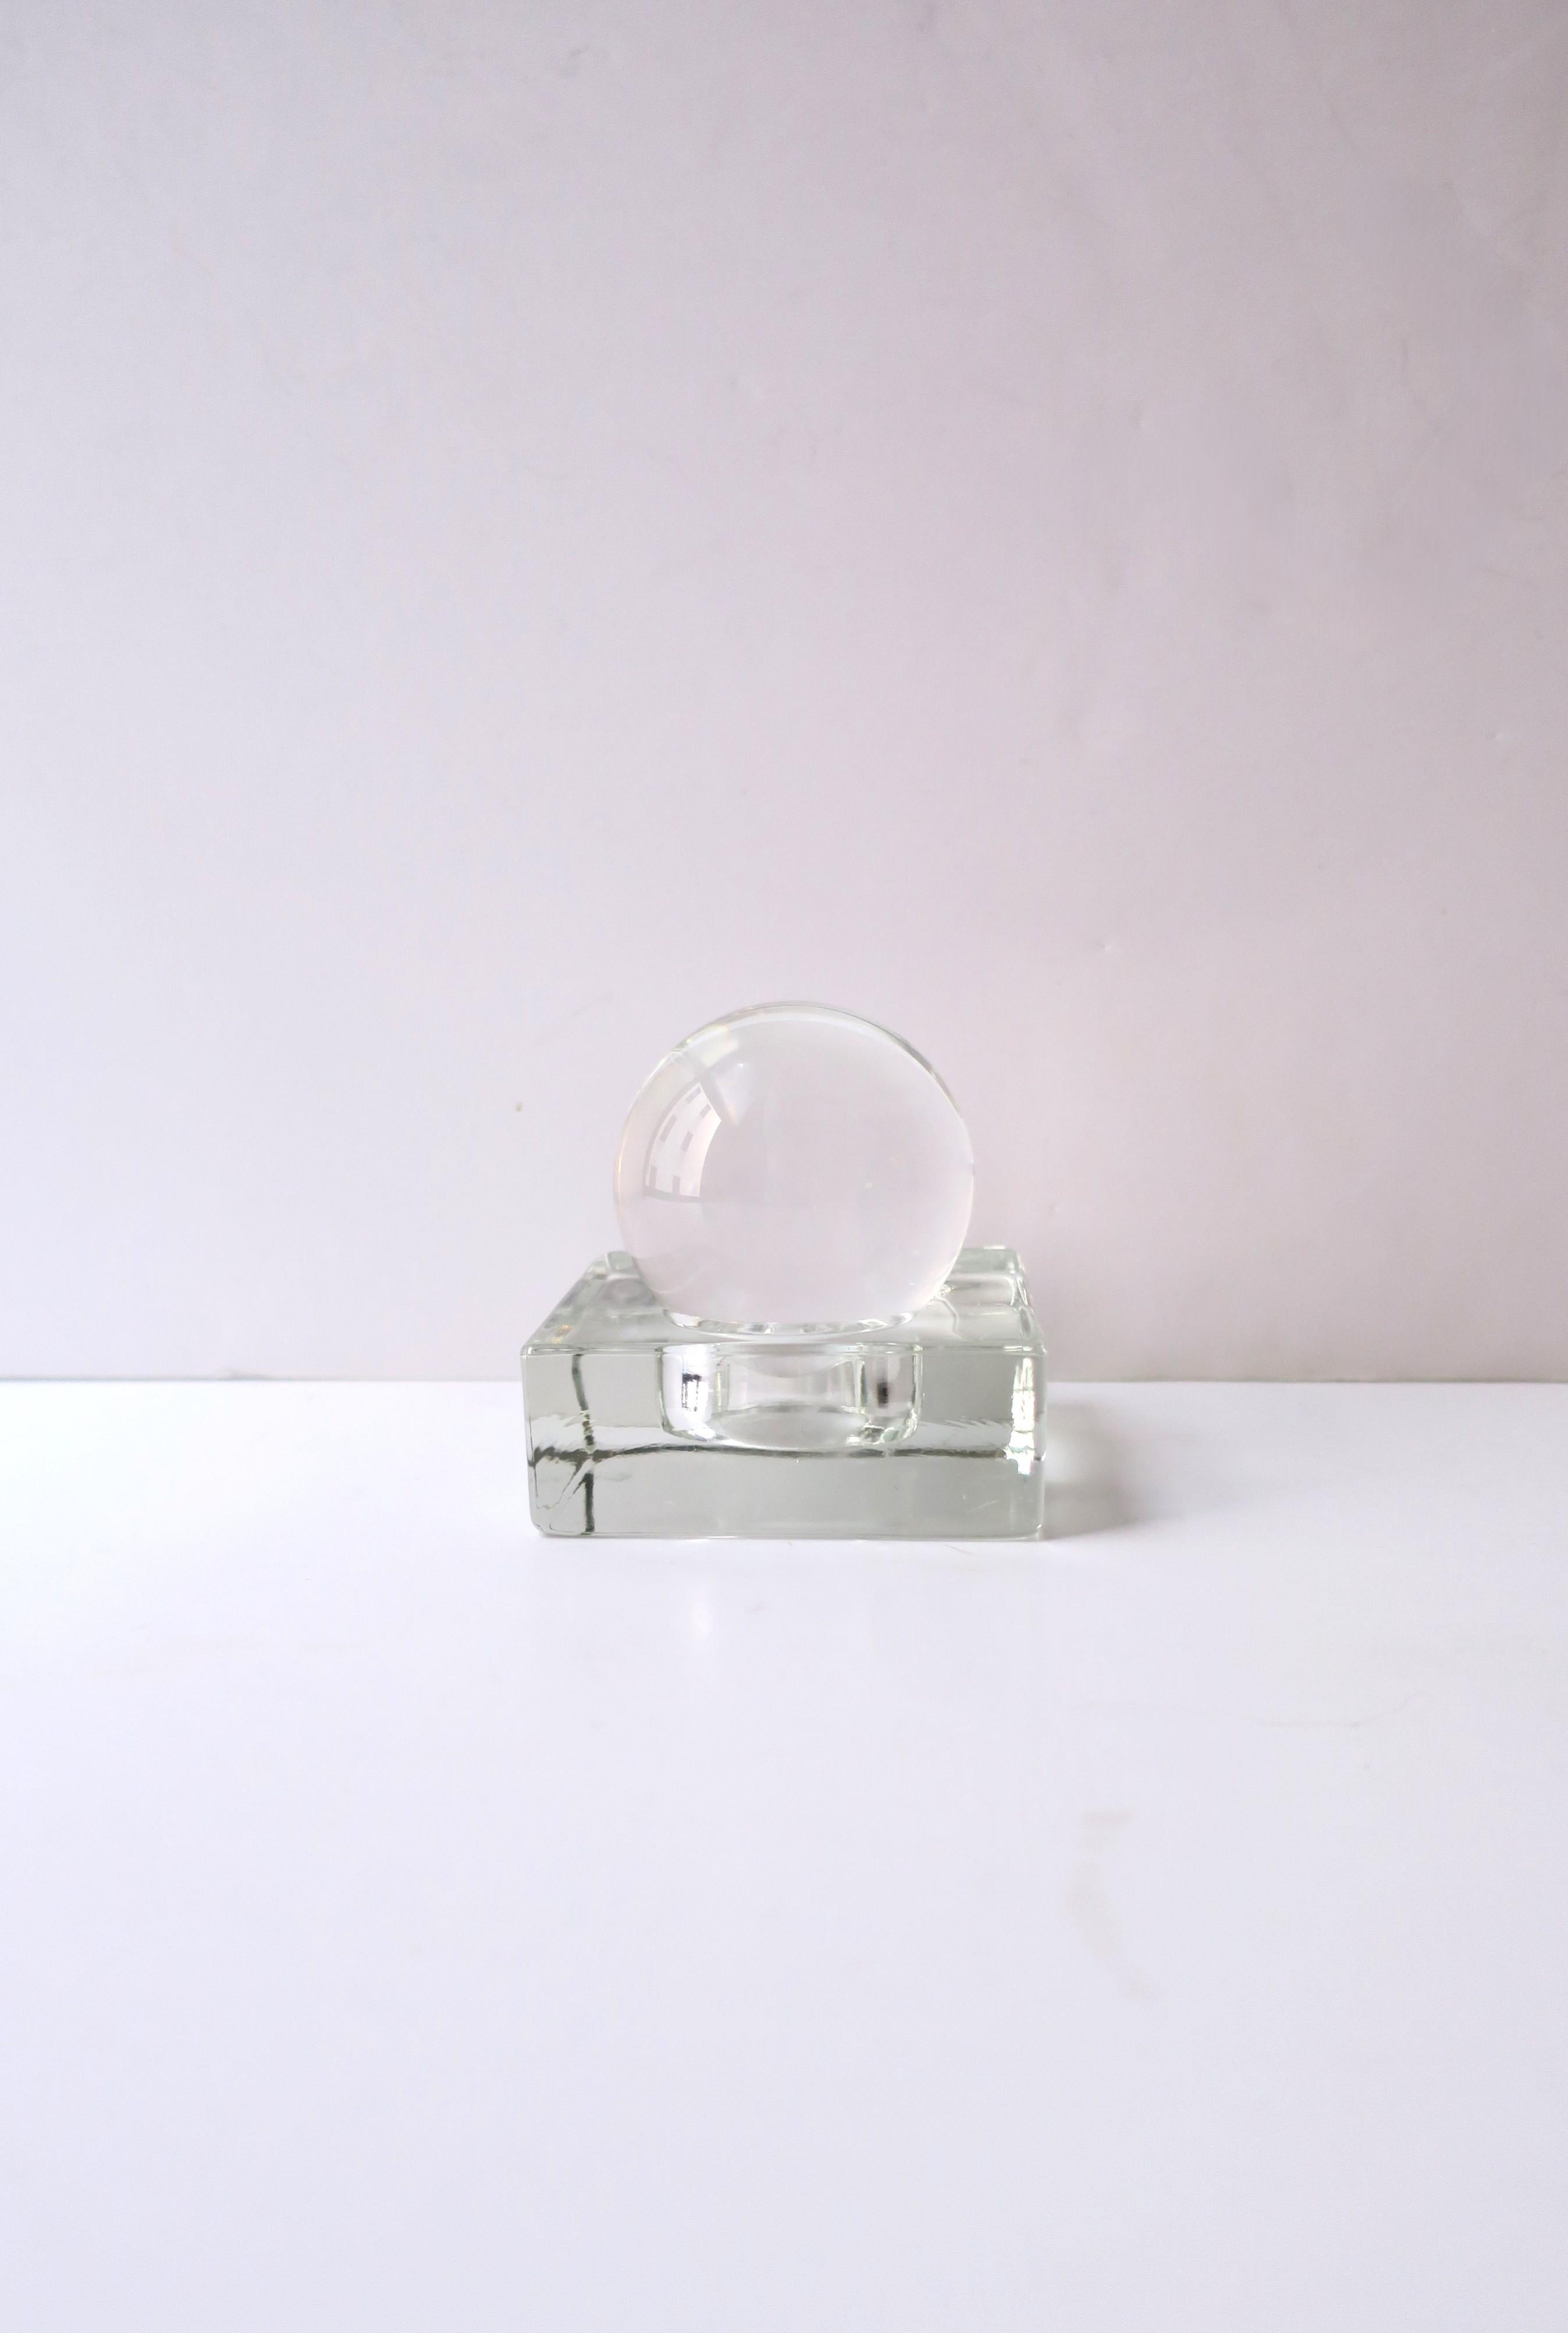 A transparent glass sphere on a square glass base decorative object or paperweight, in the Modern style, circa late-20th century. A great decorative object for a desk, library, shelf, etc. Very good condition as shown in images. 

Letter holder